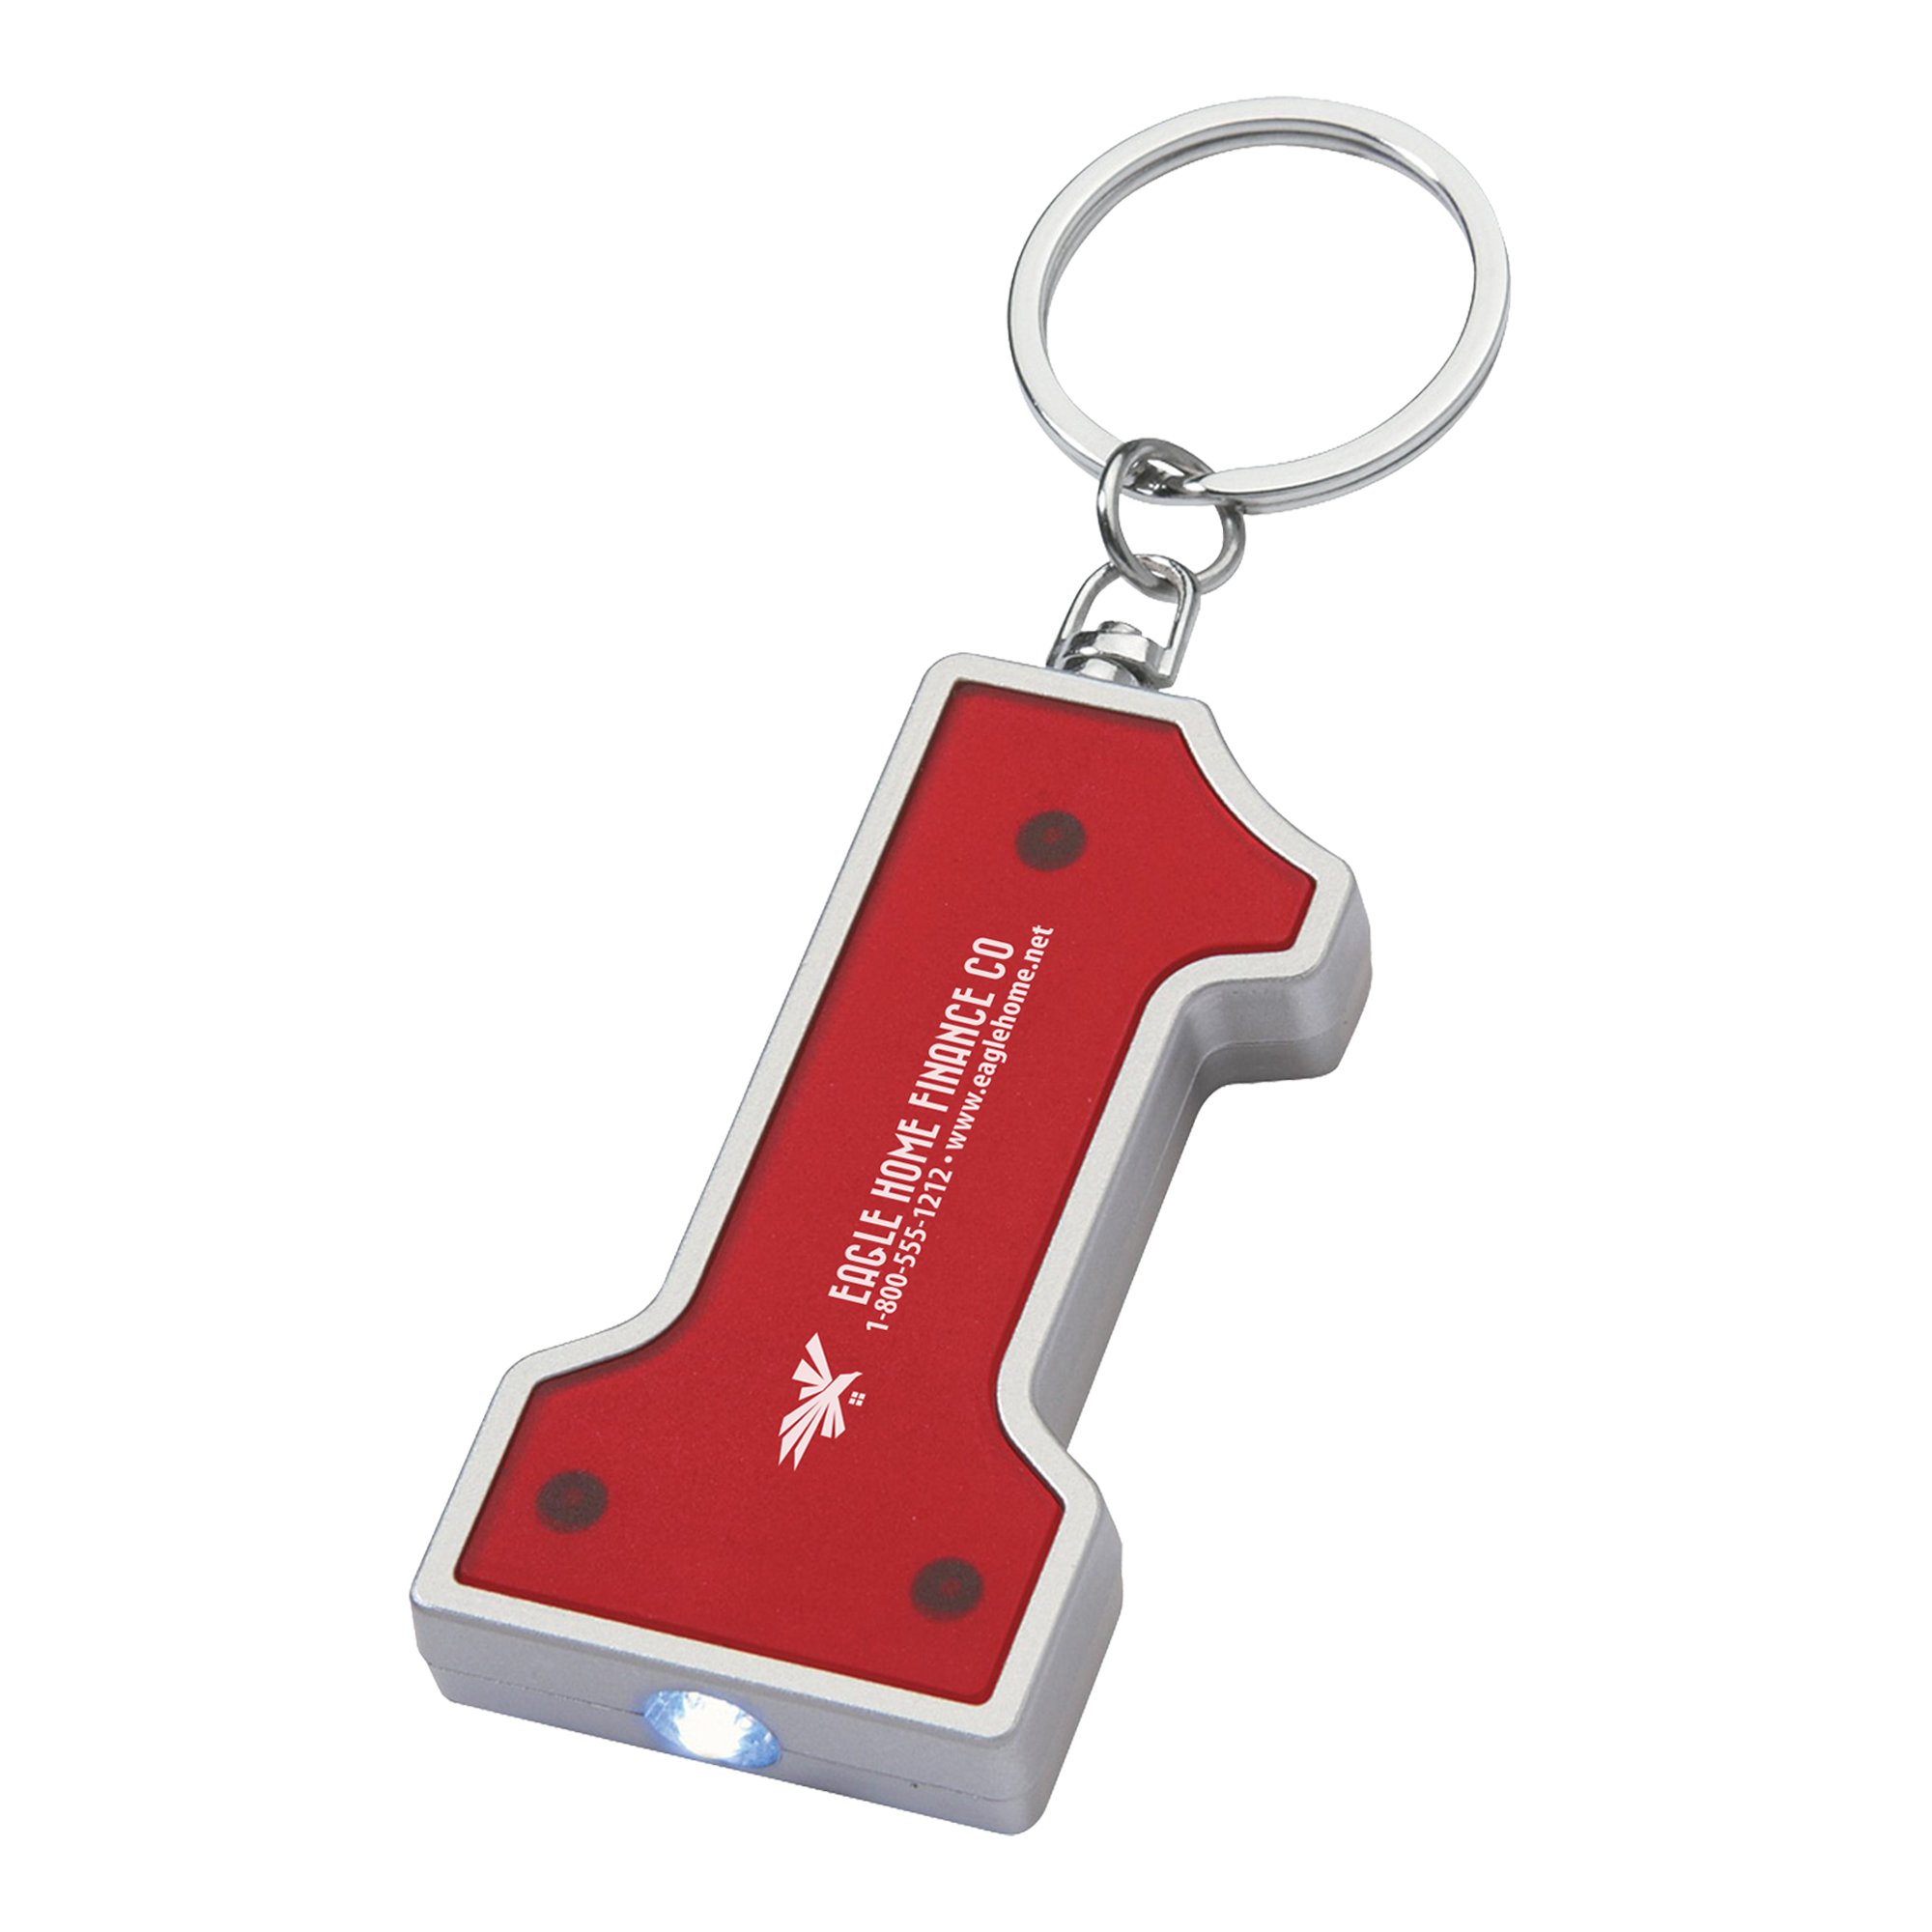 Take the light with you wherever you go! Lighten up your promotions with the customizable #1 Shape LED Key Chain! Just push the button to turn the light on! Button cell batteries included.